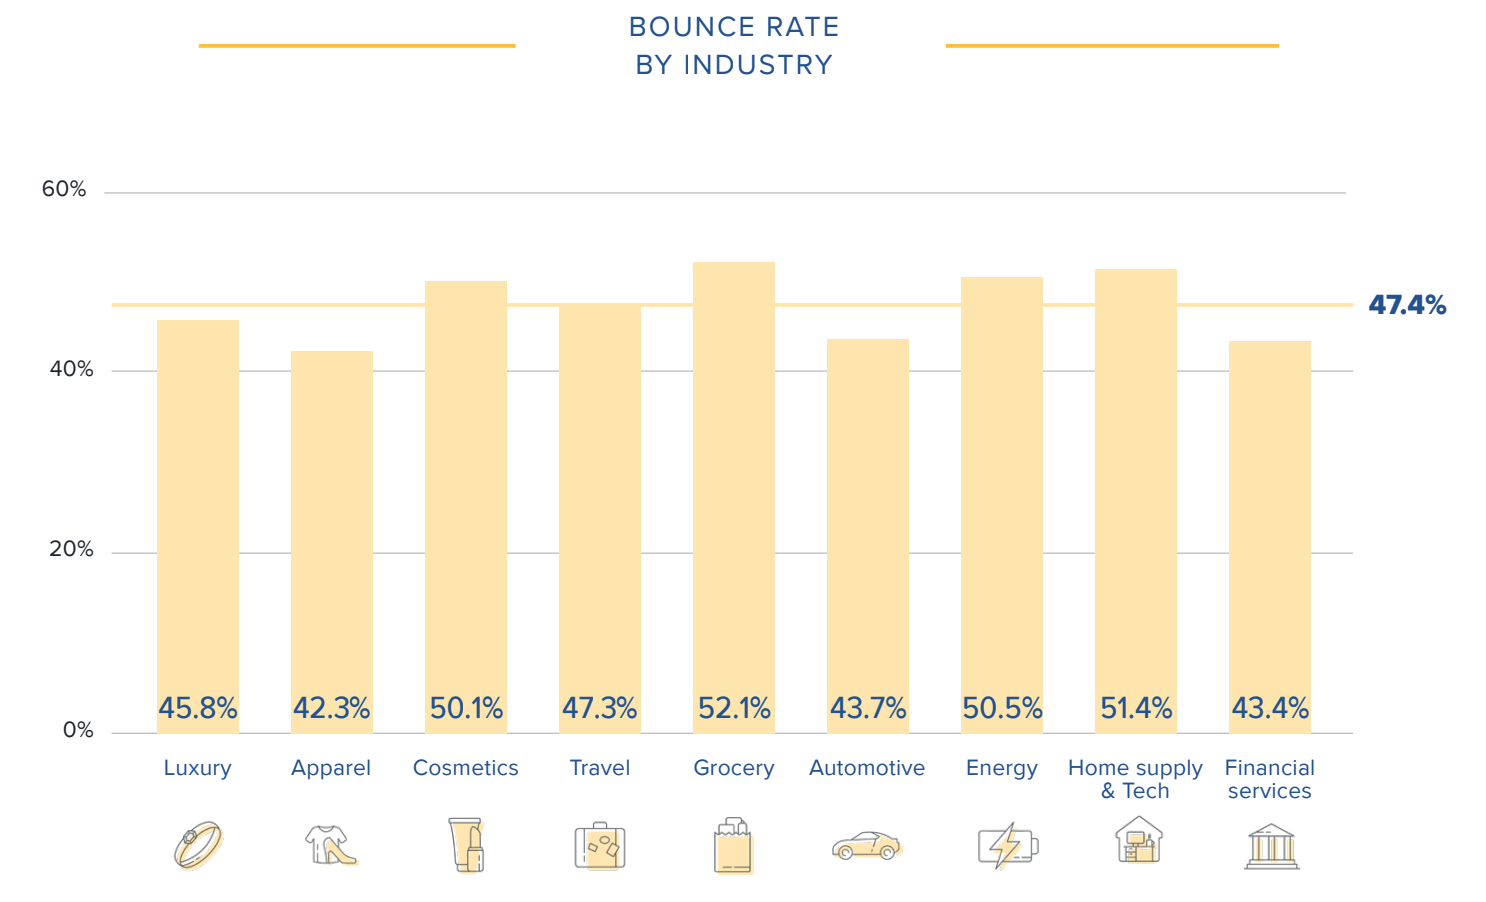 A graph of average bounce rate by industry - see our annual benchmark report for detailed information